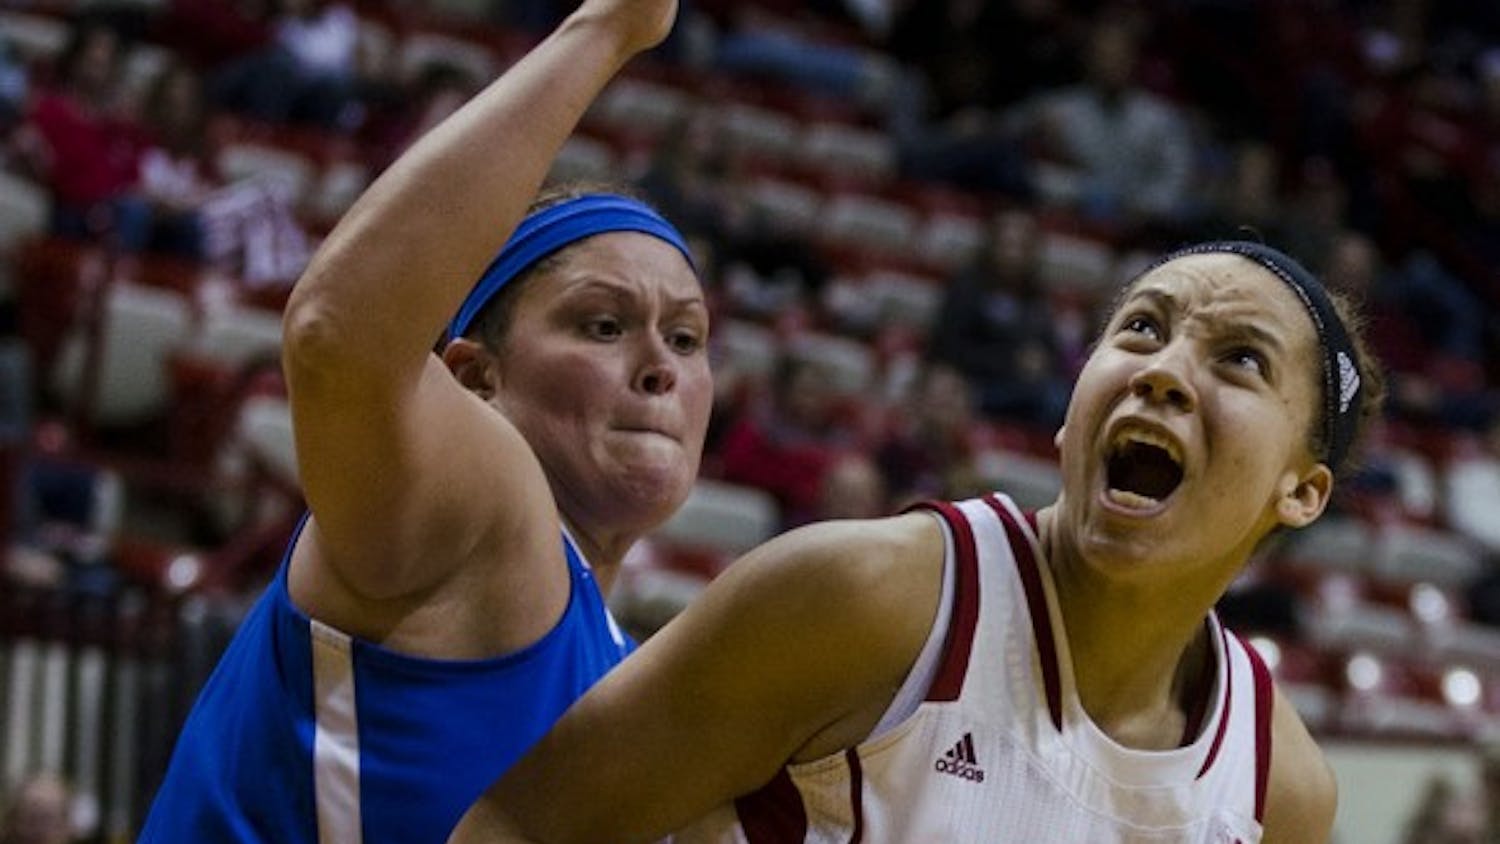 Sophomore guard Alexis Gassion attempts to get free for a shot during the Hoosier's game against the Mastodons on Wednesday at Assembly Hall. The Hoosier won 80-37 and advanced to 8-1.